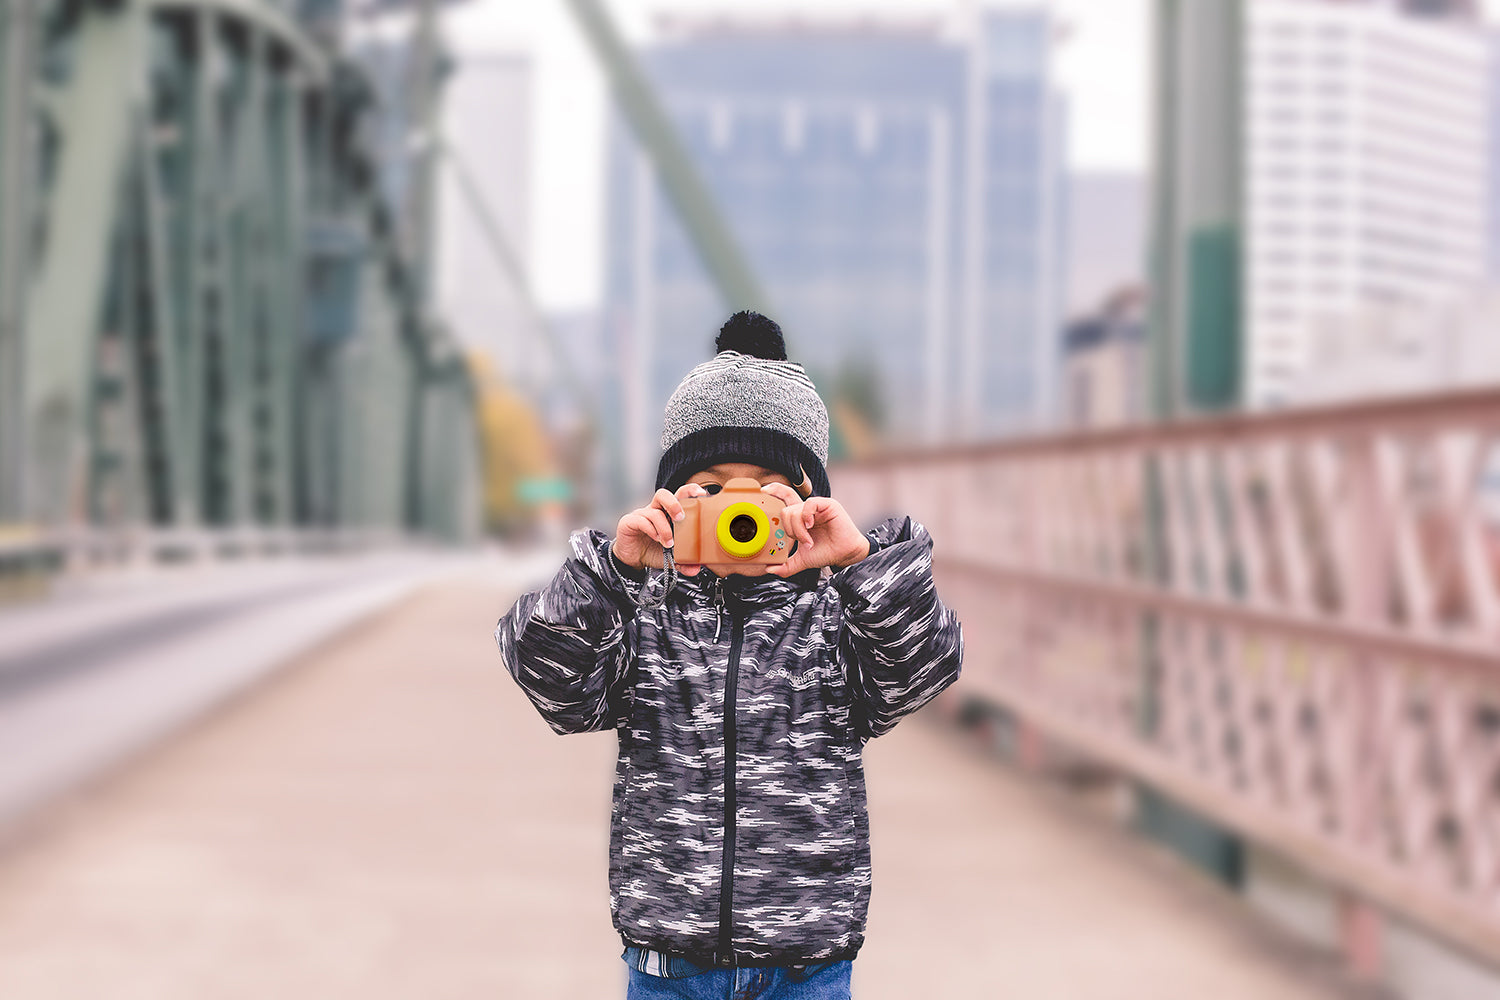 Kids should be introduced to photography young!